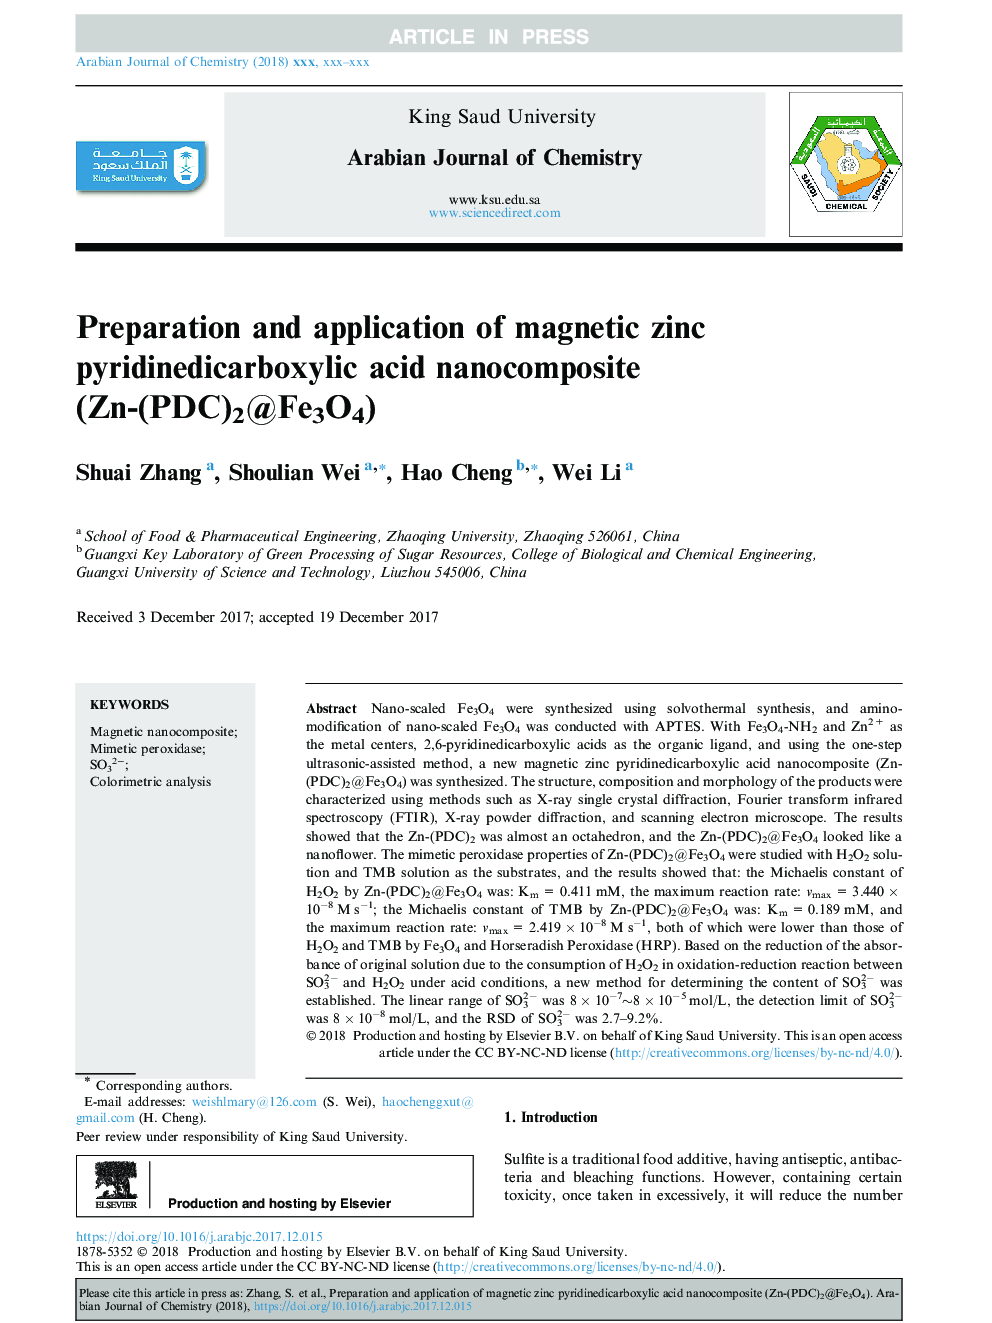 Preparation and application of magnetic zinc pyridinedicarboxylic acid nanocomposite (Zn-(PDC)2@Fe3O4)